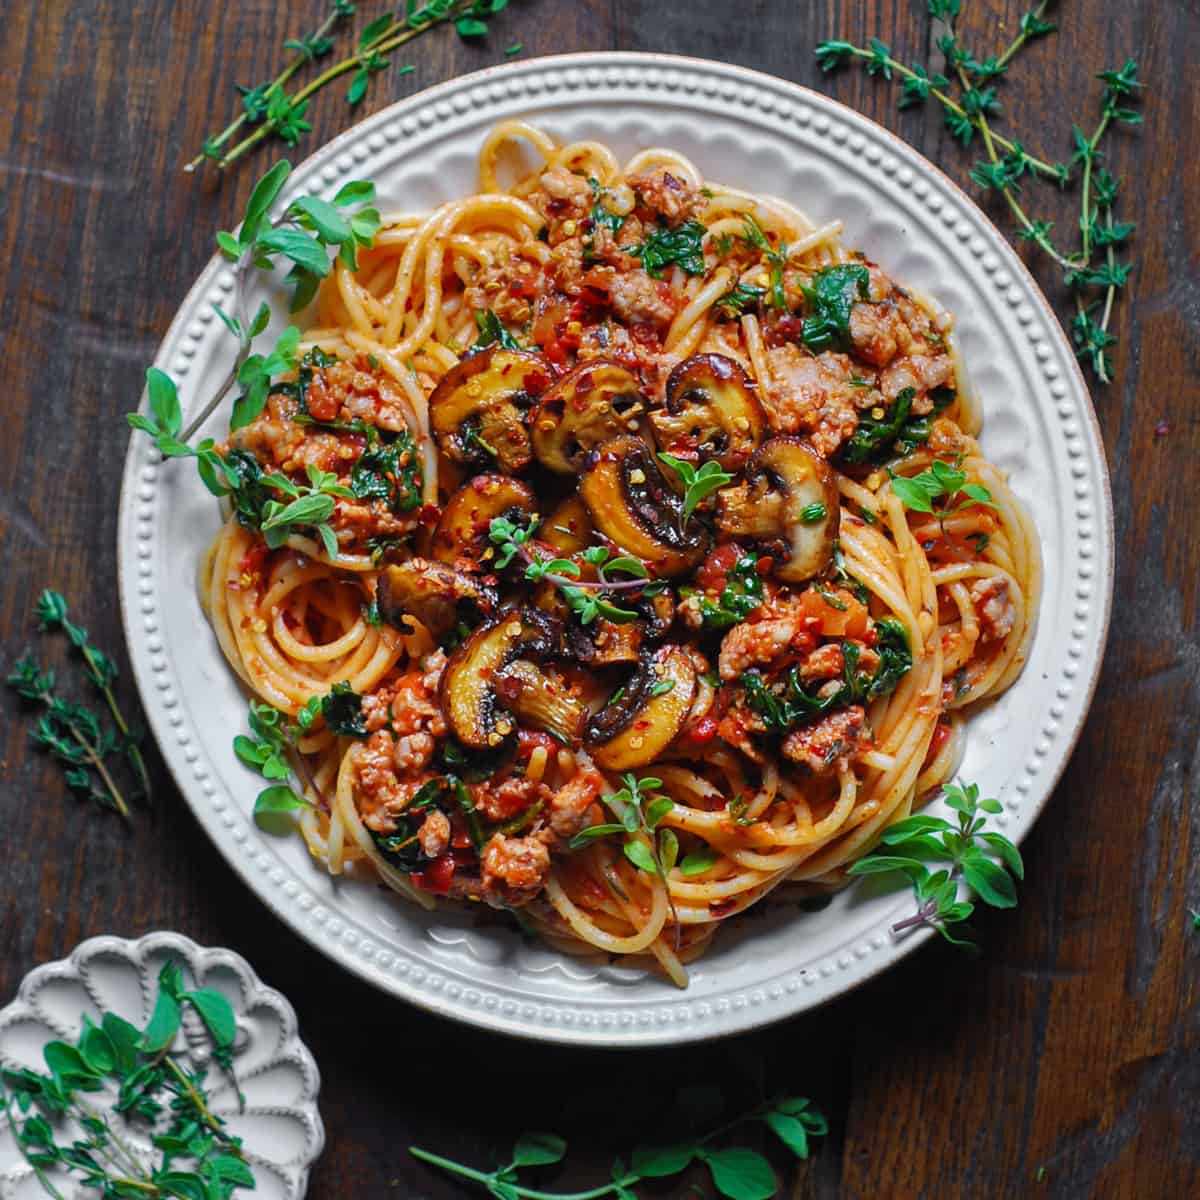 Sausage Mushroom Pasta with Spinach and Tomato Sauce - on a plate.